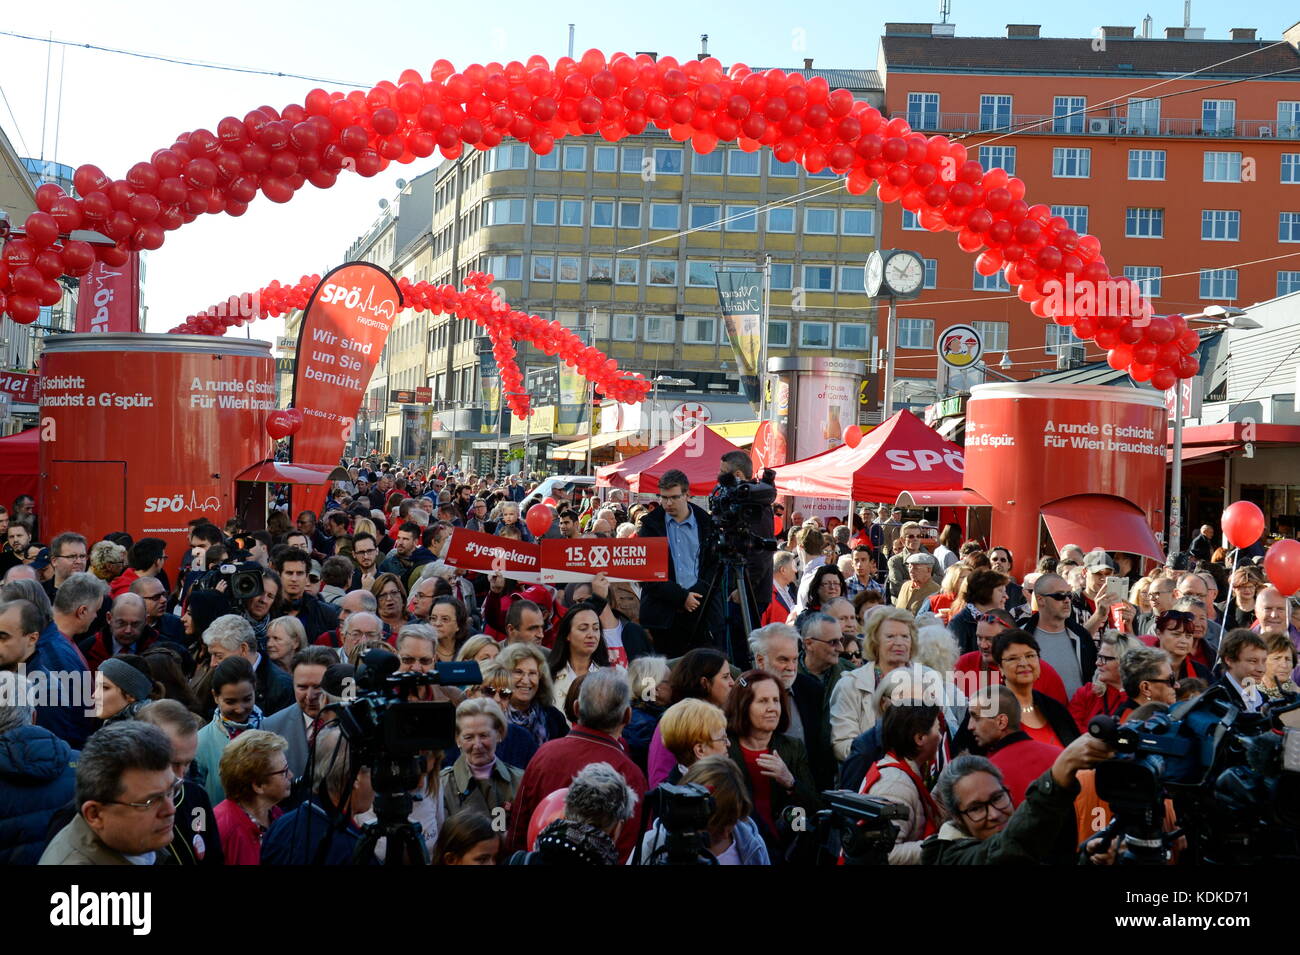 Vienna, Austria. 14 October 2017. Final rally of the SPÖ (Social Democratic Party of Austria) at the Viktor Adler market. Picture shows supporters of the SPÖ'.  .Credit: Franz Perc / Alamy Live News Stock Photo